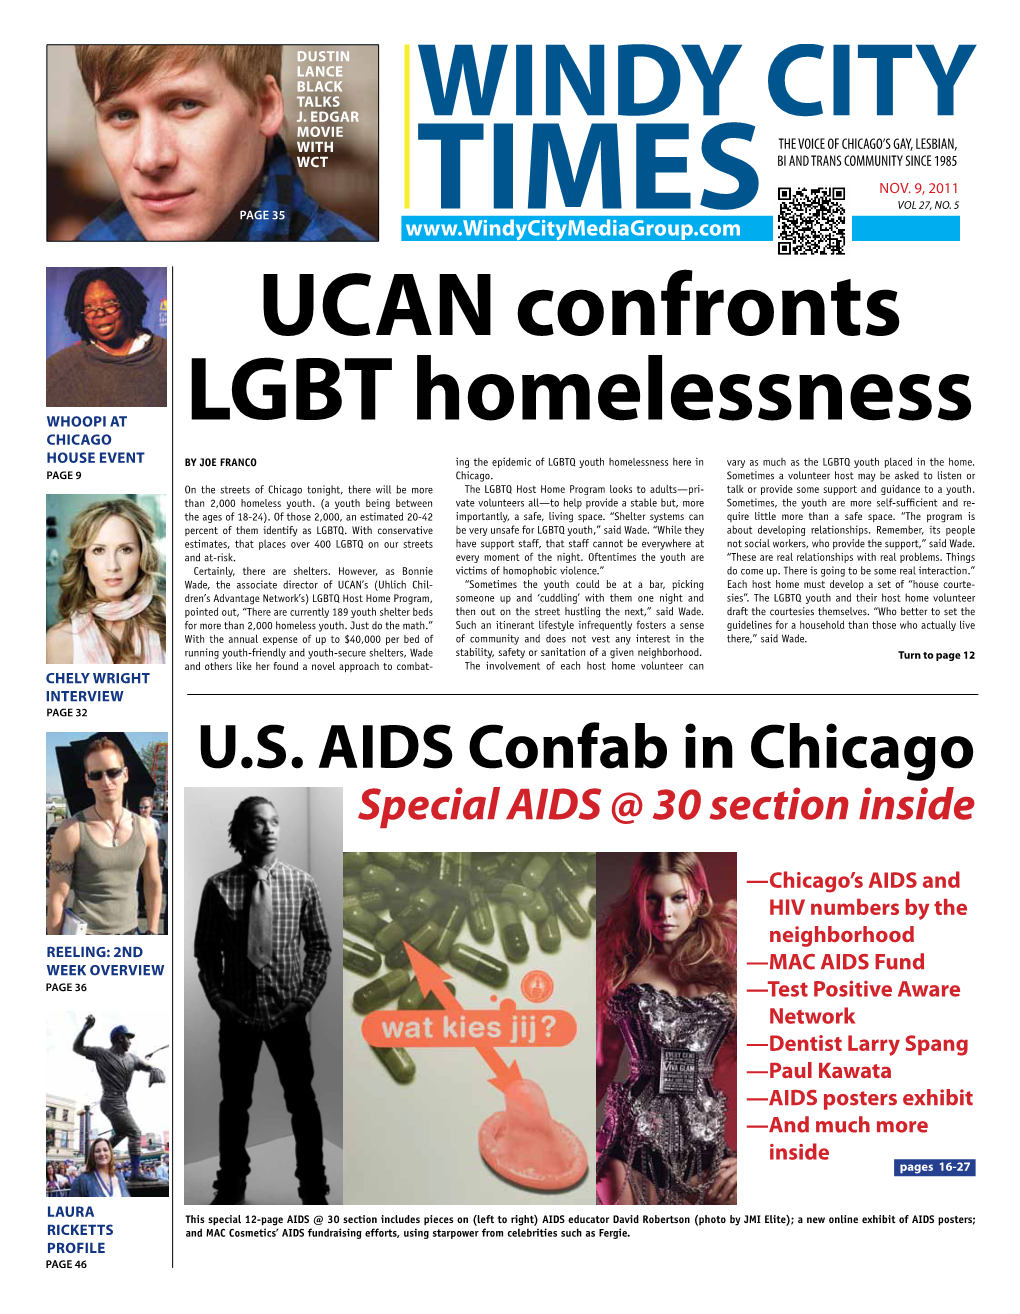 U.S. AIDS Confab in Chicago Special AIDS @ 30 Section Inside